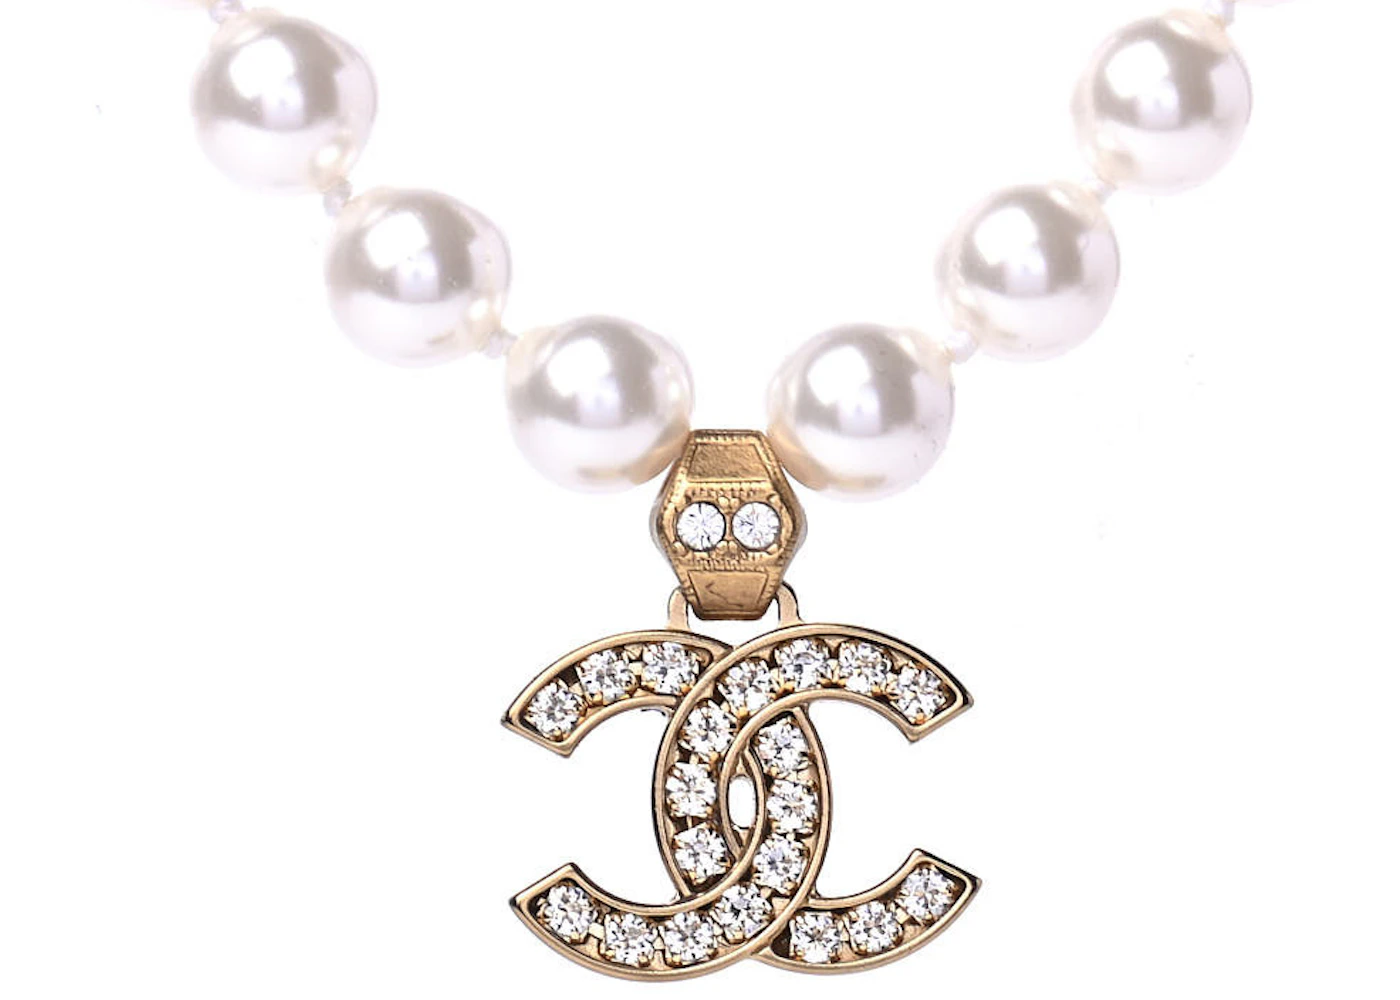 chanel gold and pearl necklace